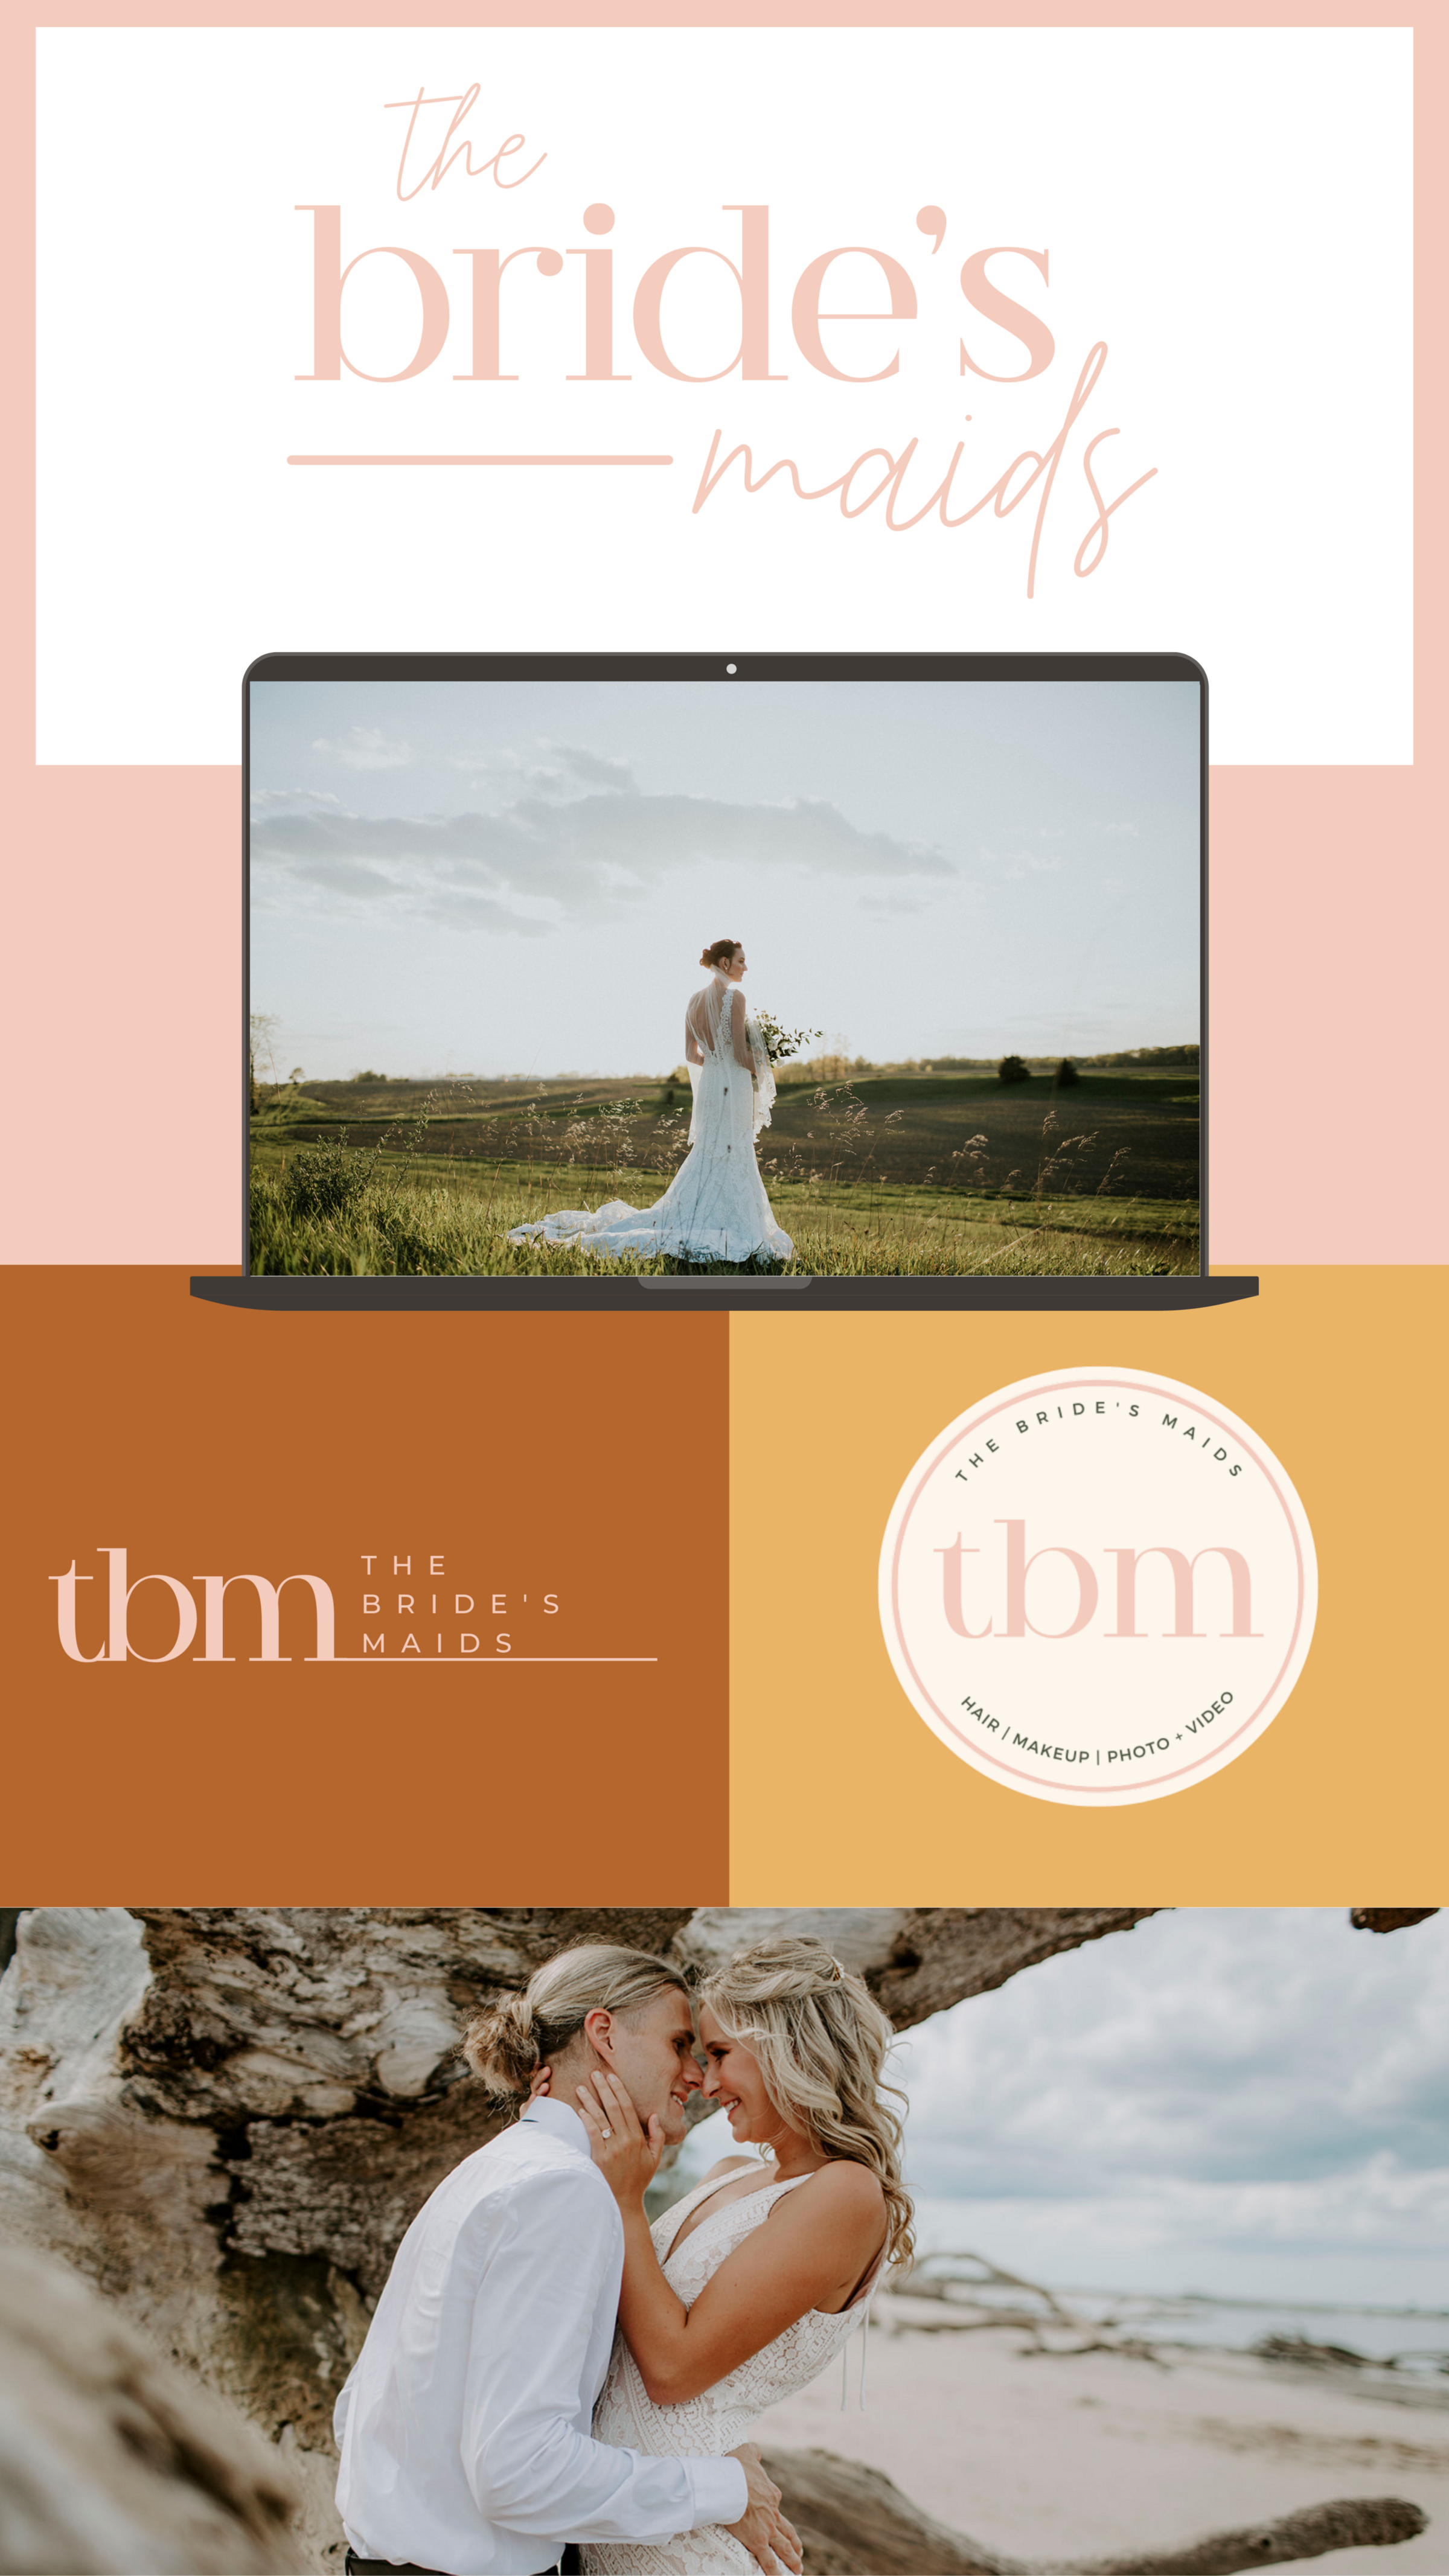 Minimal Brand Moodboard with Laptop Mockup for Instagram